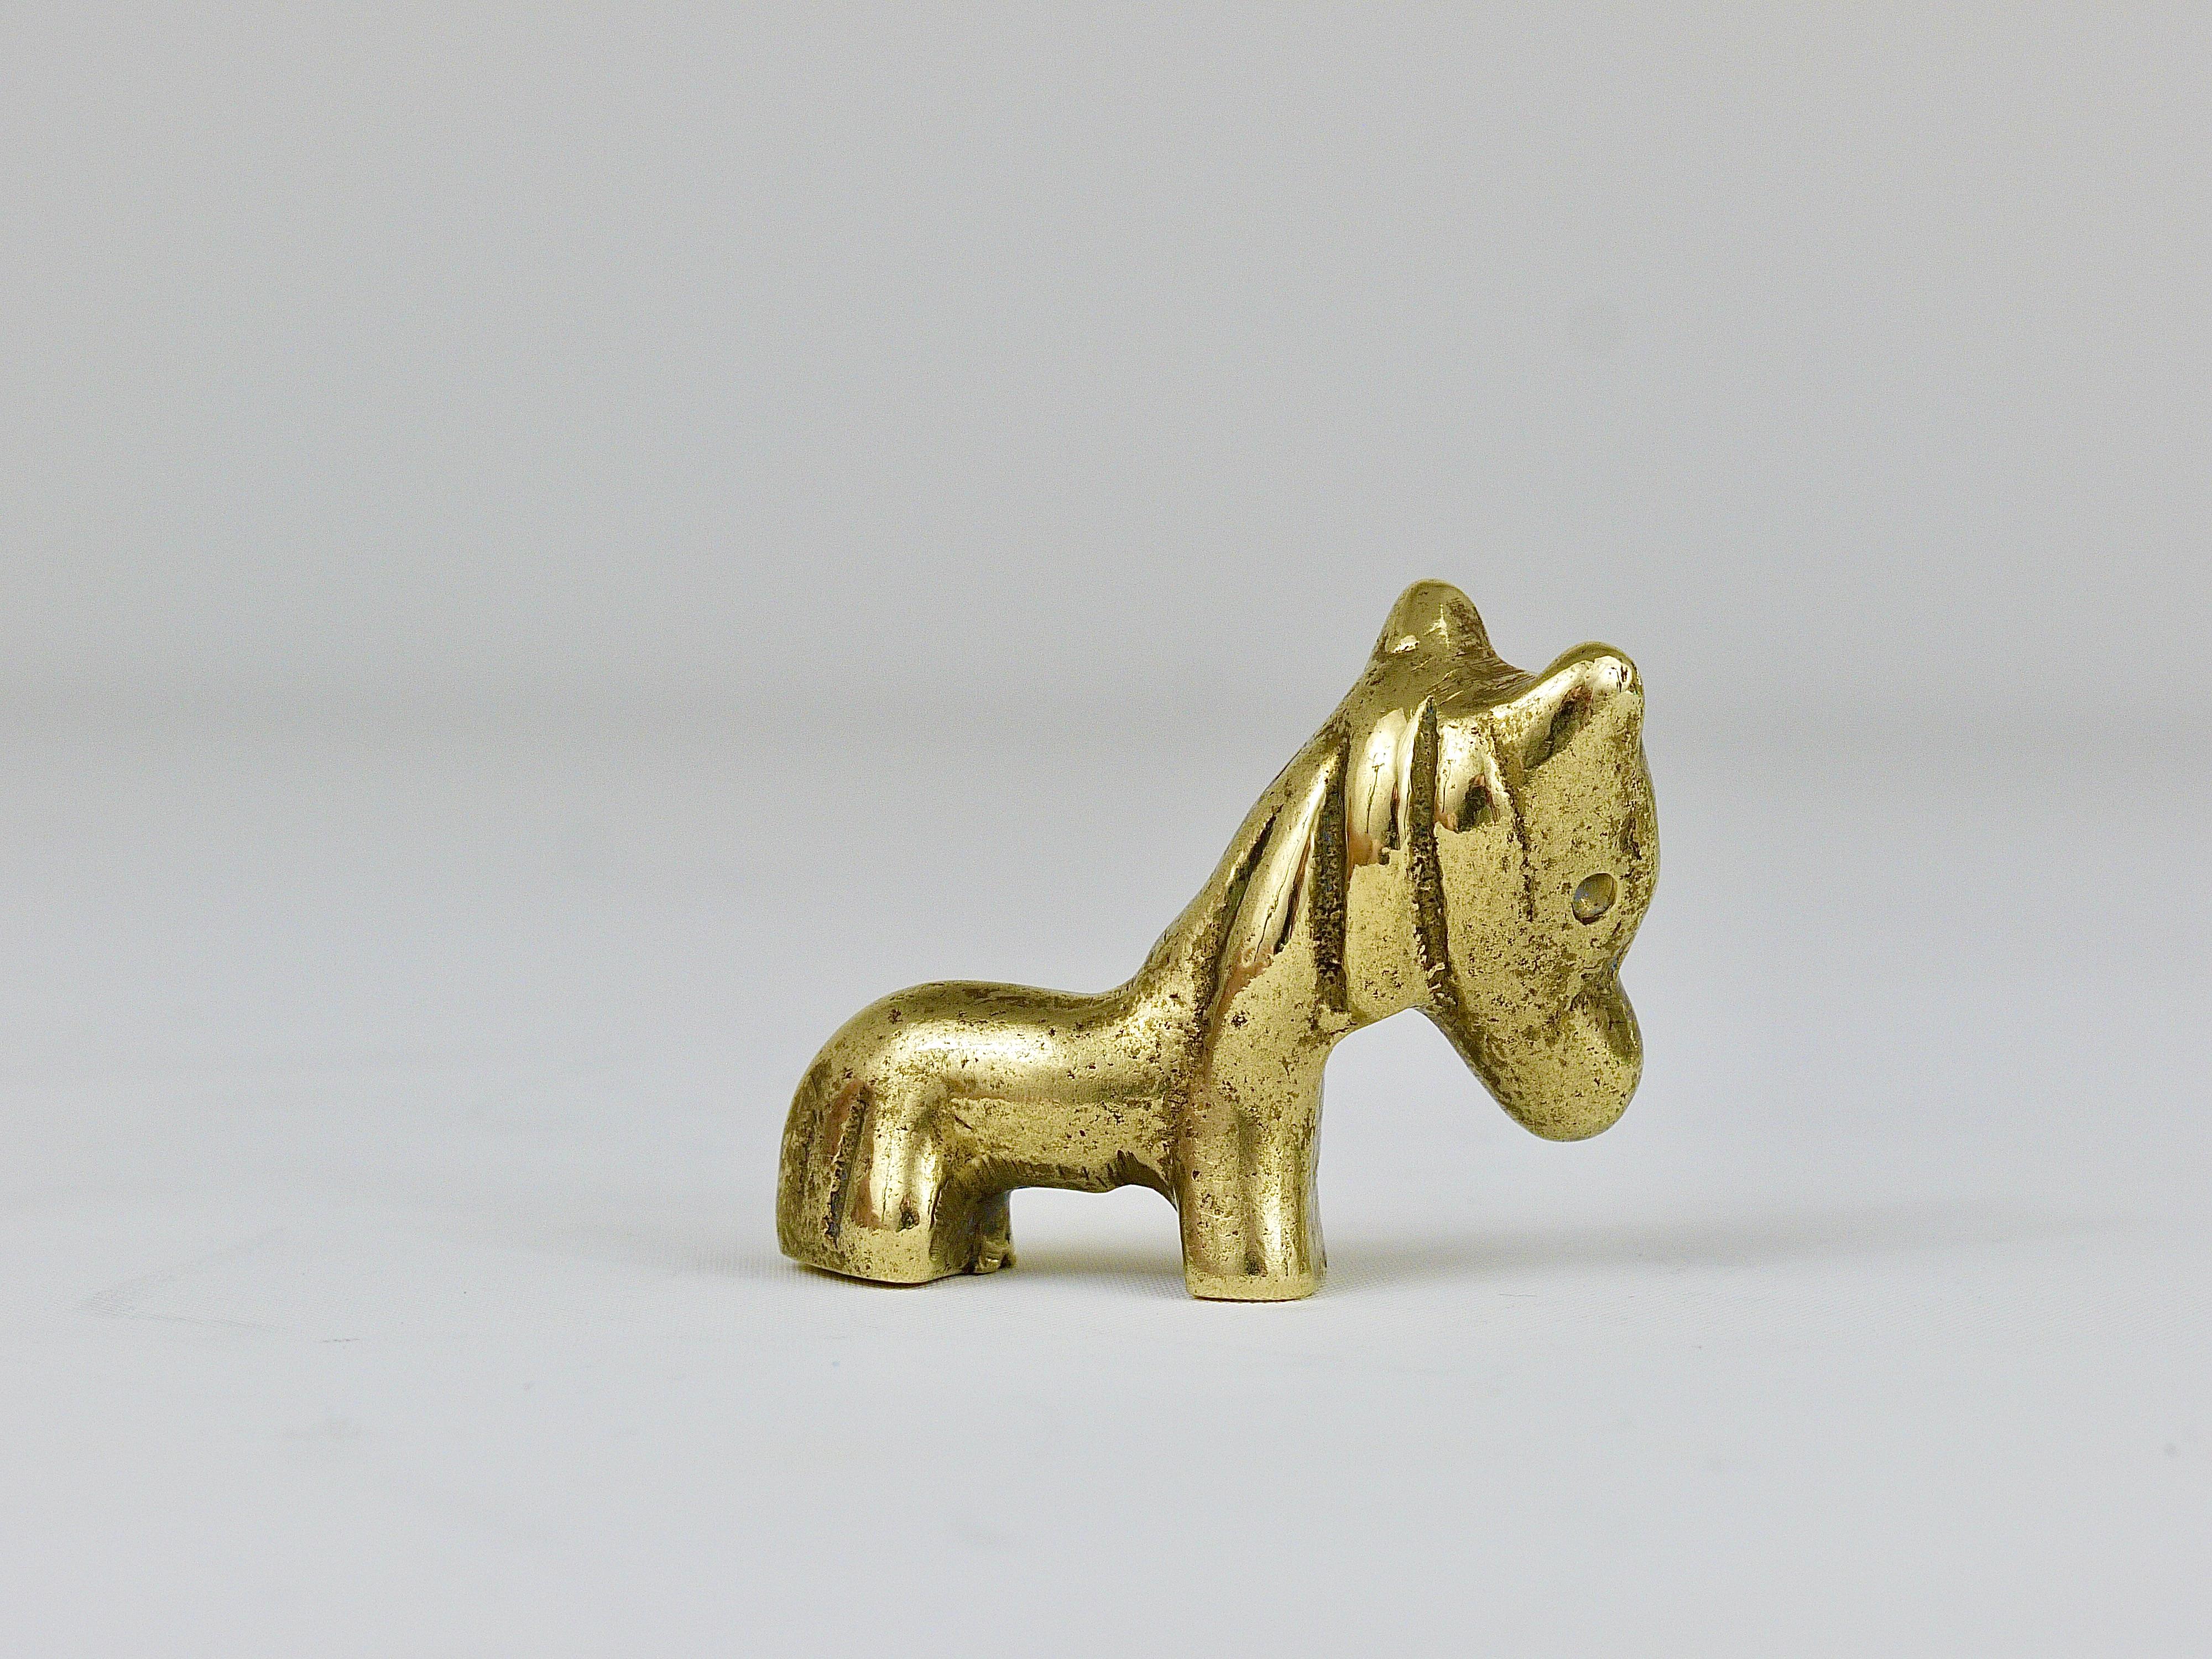 A lovely pony foal baby horse sculpture made of brass from the 1950s. Designed by Walter Bosse, executed by Hertha Baller. In good condition with nice patina on the brass.